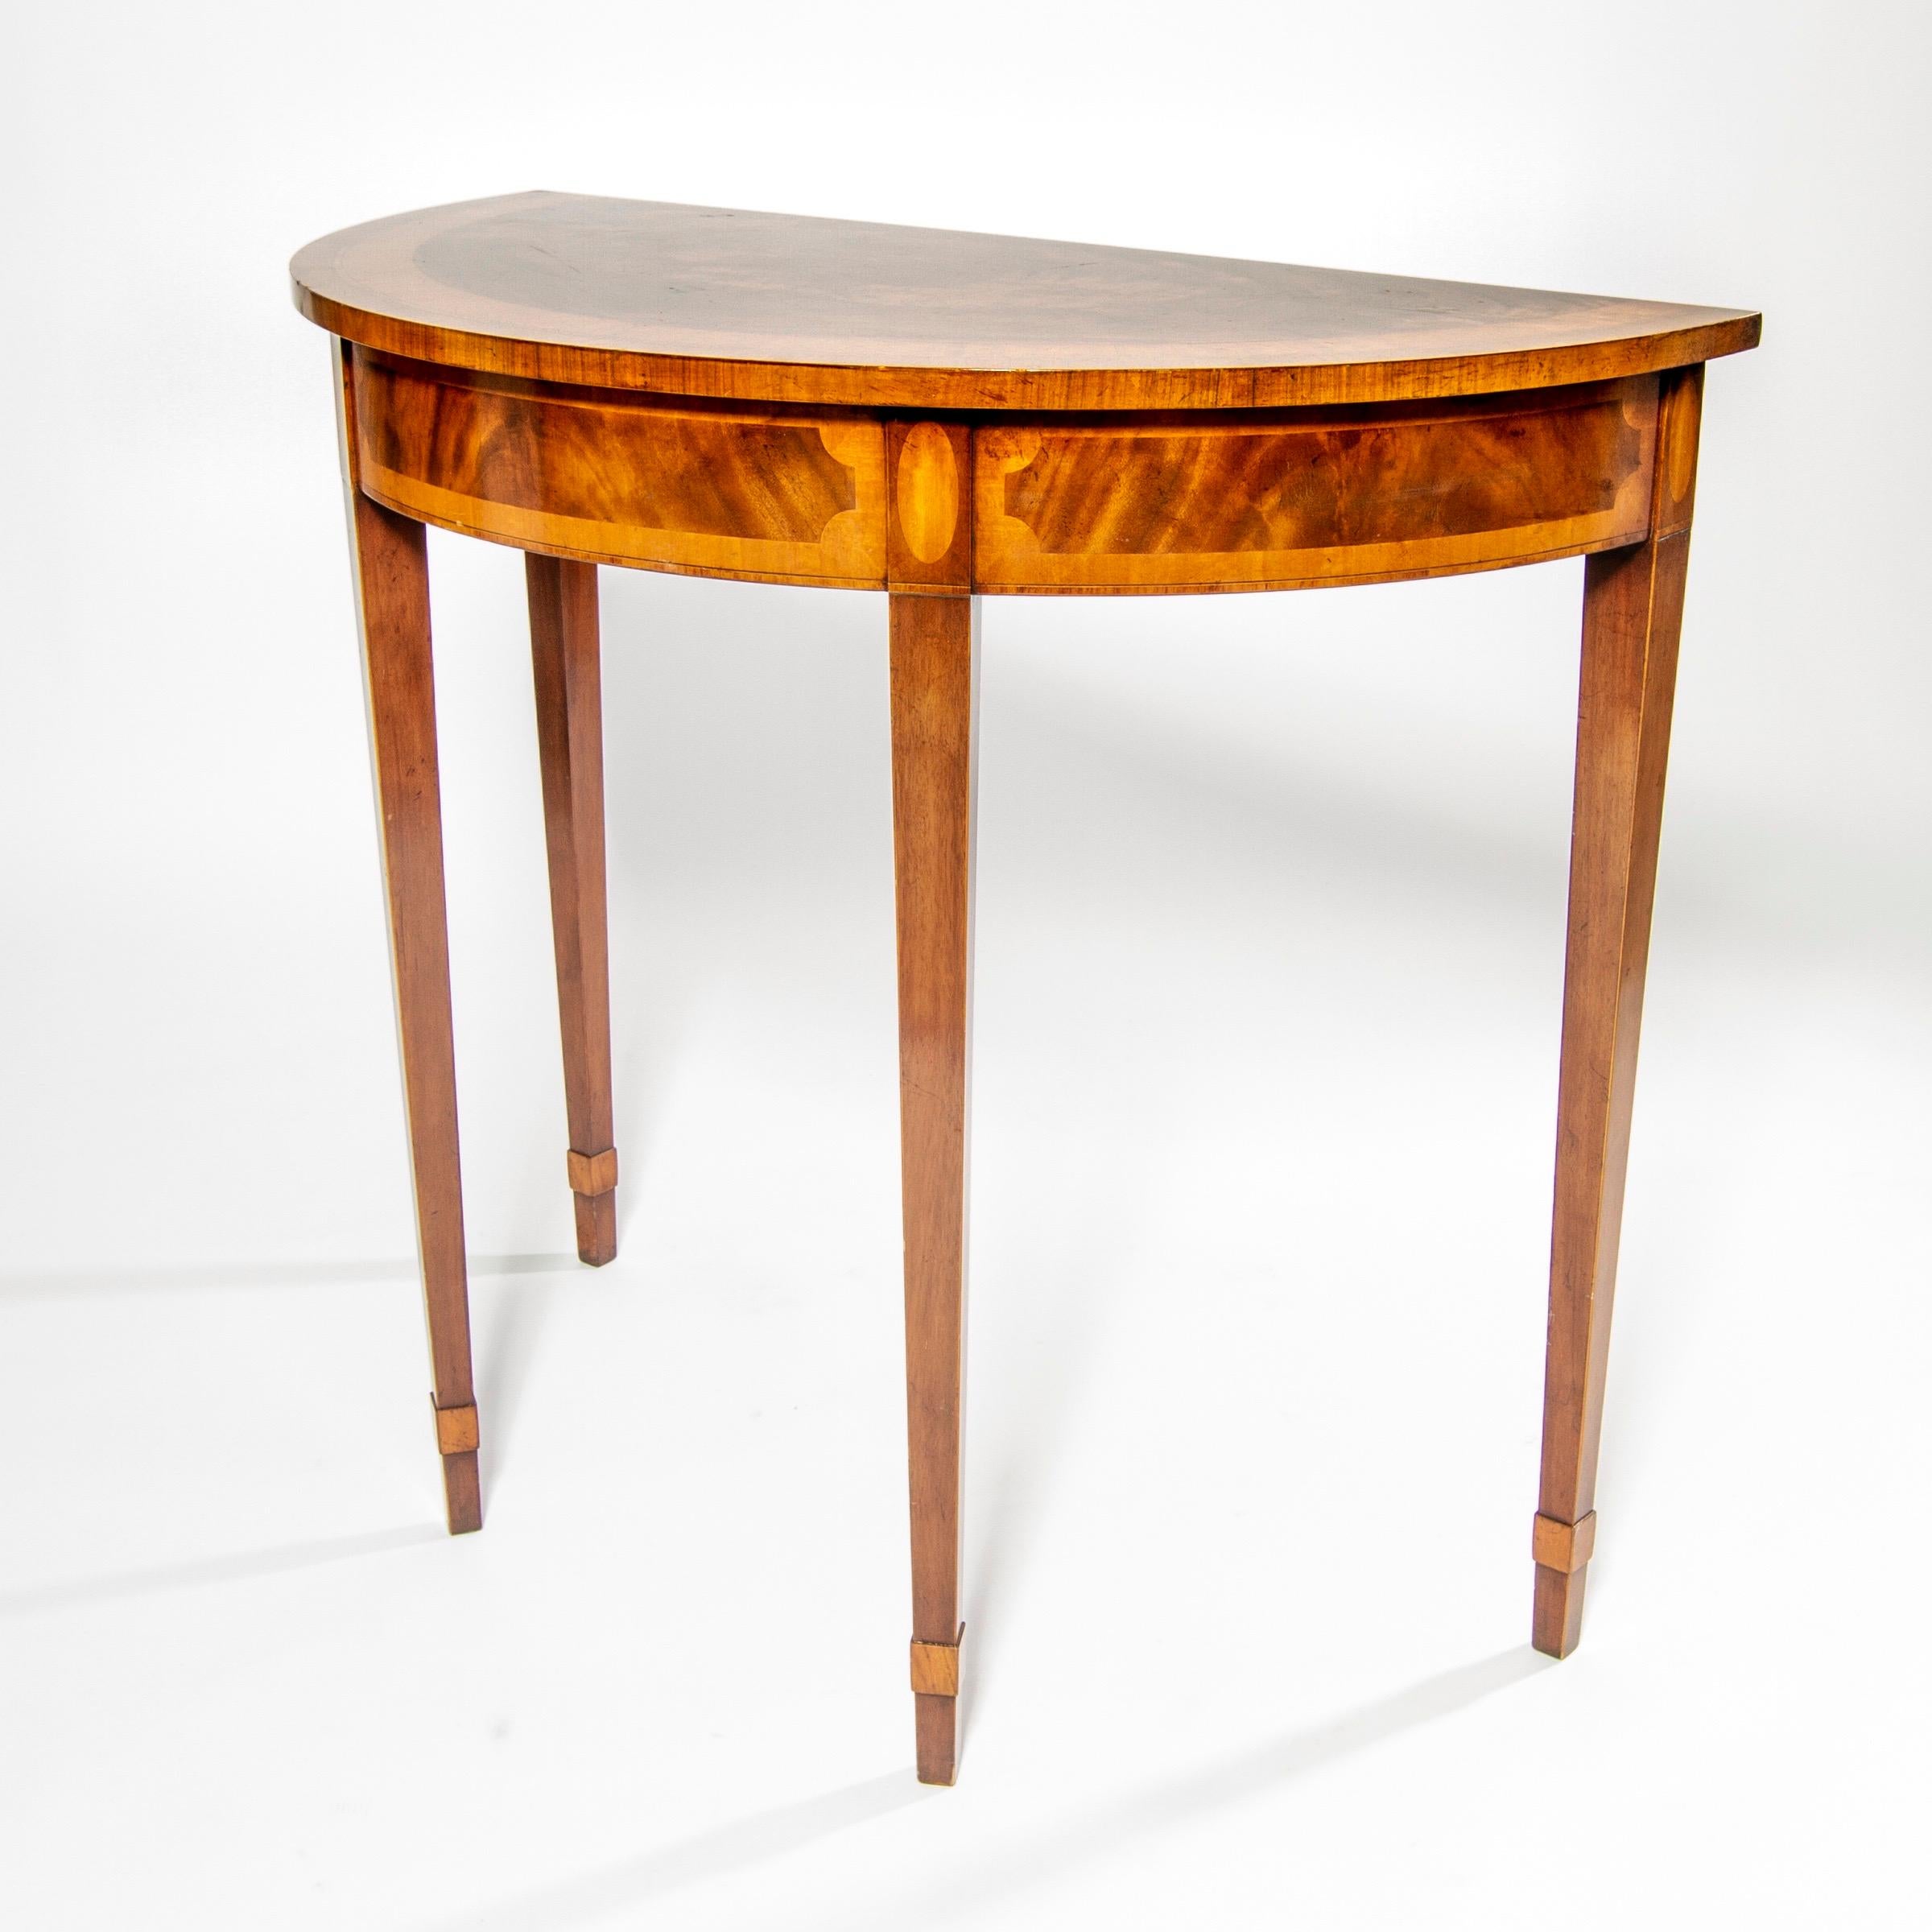 Beautiful neoclassical directoire style demi lune console table rendered in mahogany with exquisite inlay marquetry of maple and burl elm, by RBC (Restall Brown and Clennell) furniture of England.